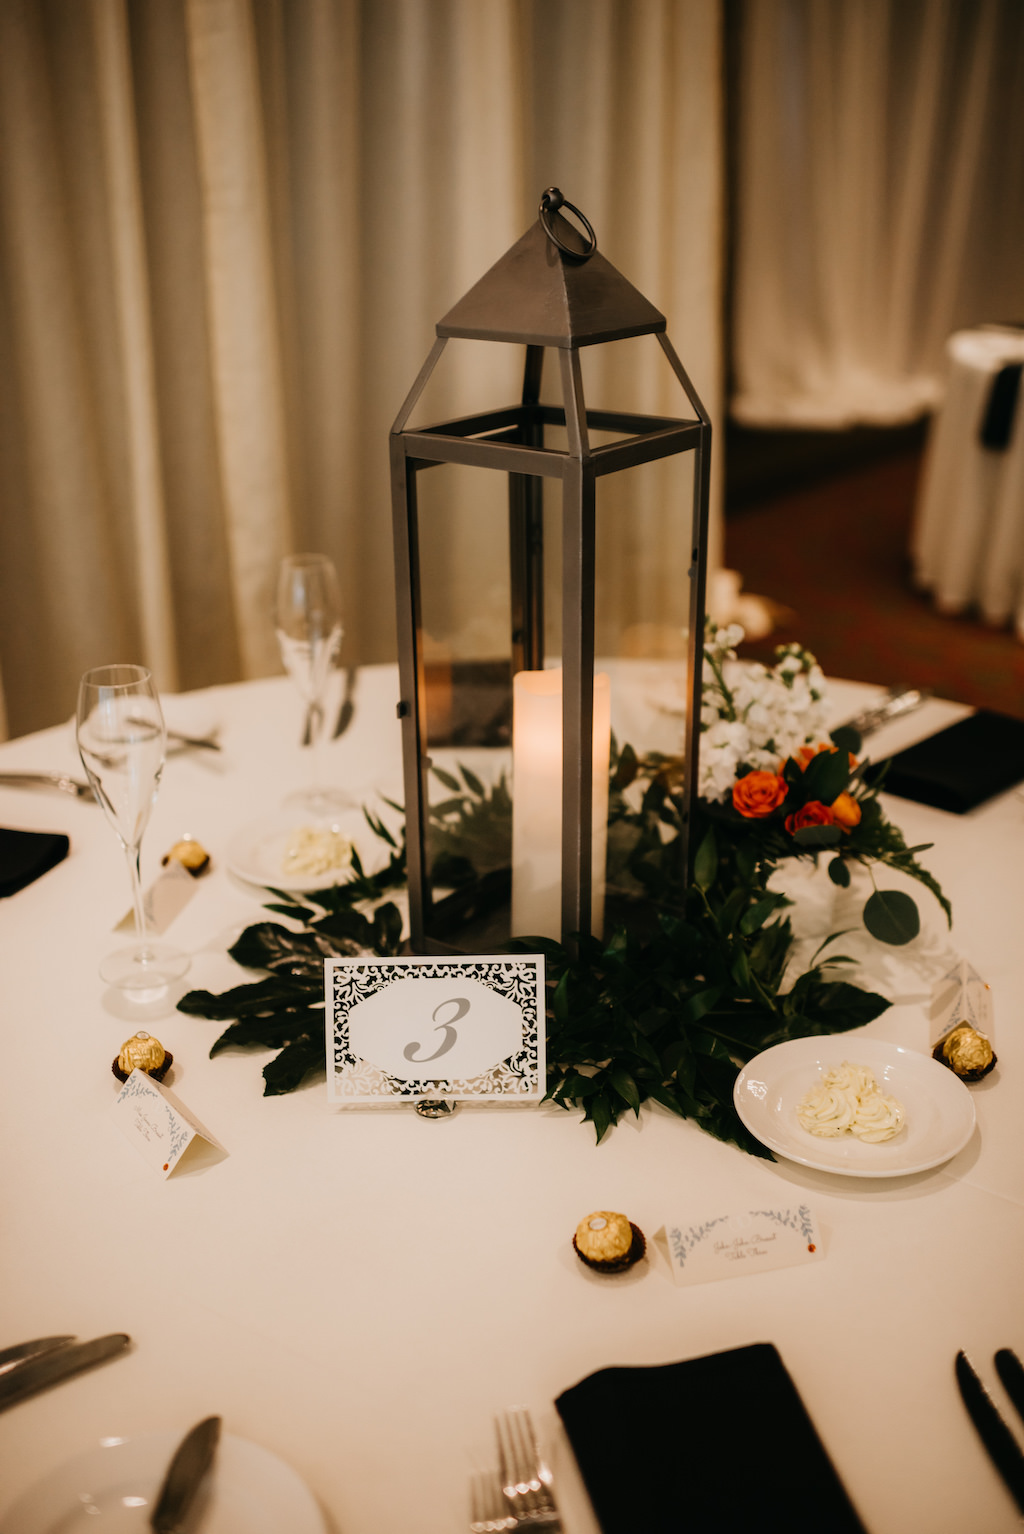 Old Florida Inspired Wedding Reception Decor, Tall Black Lantern with Candle, Greenery Wreath and Table Number